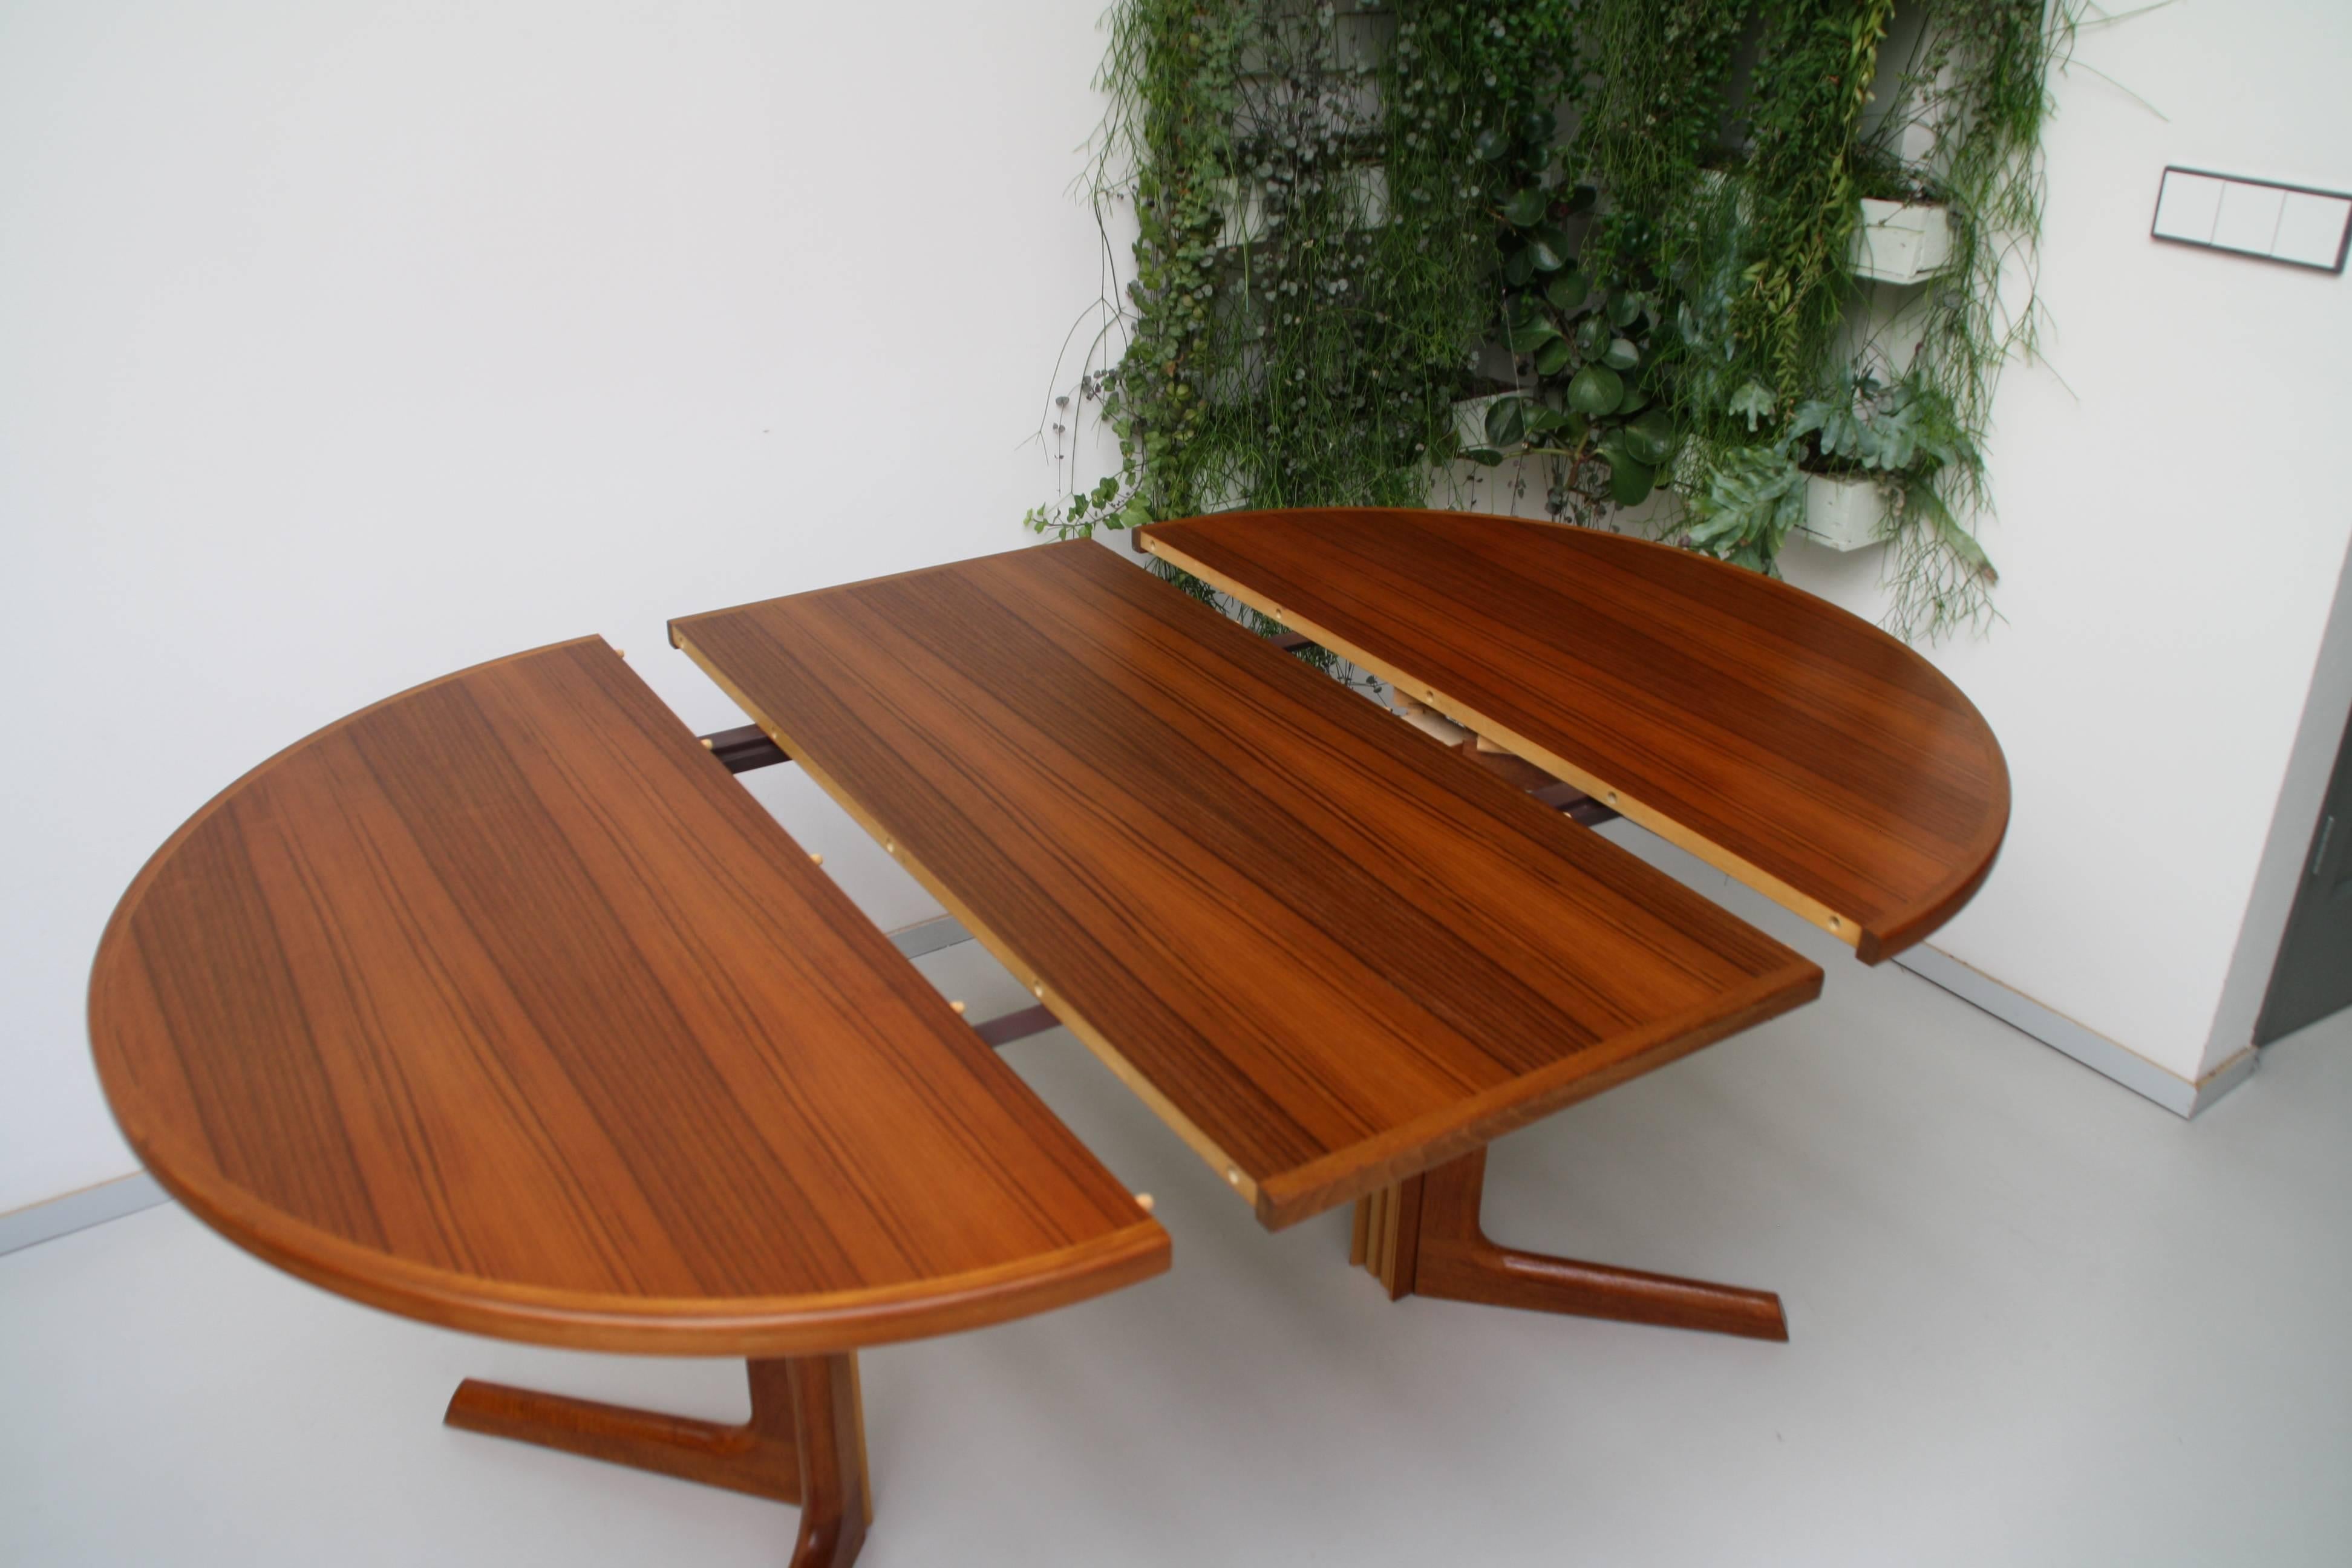 Beautiful teak wooden Danish design dining table. From a round table extends with extra leave to oval shape. Designer Niels Otto Møller. For Gudme Møblefabrik (stamped), Denmark.